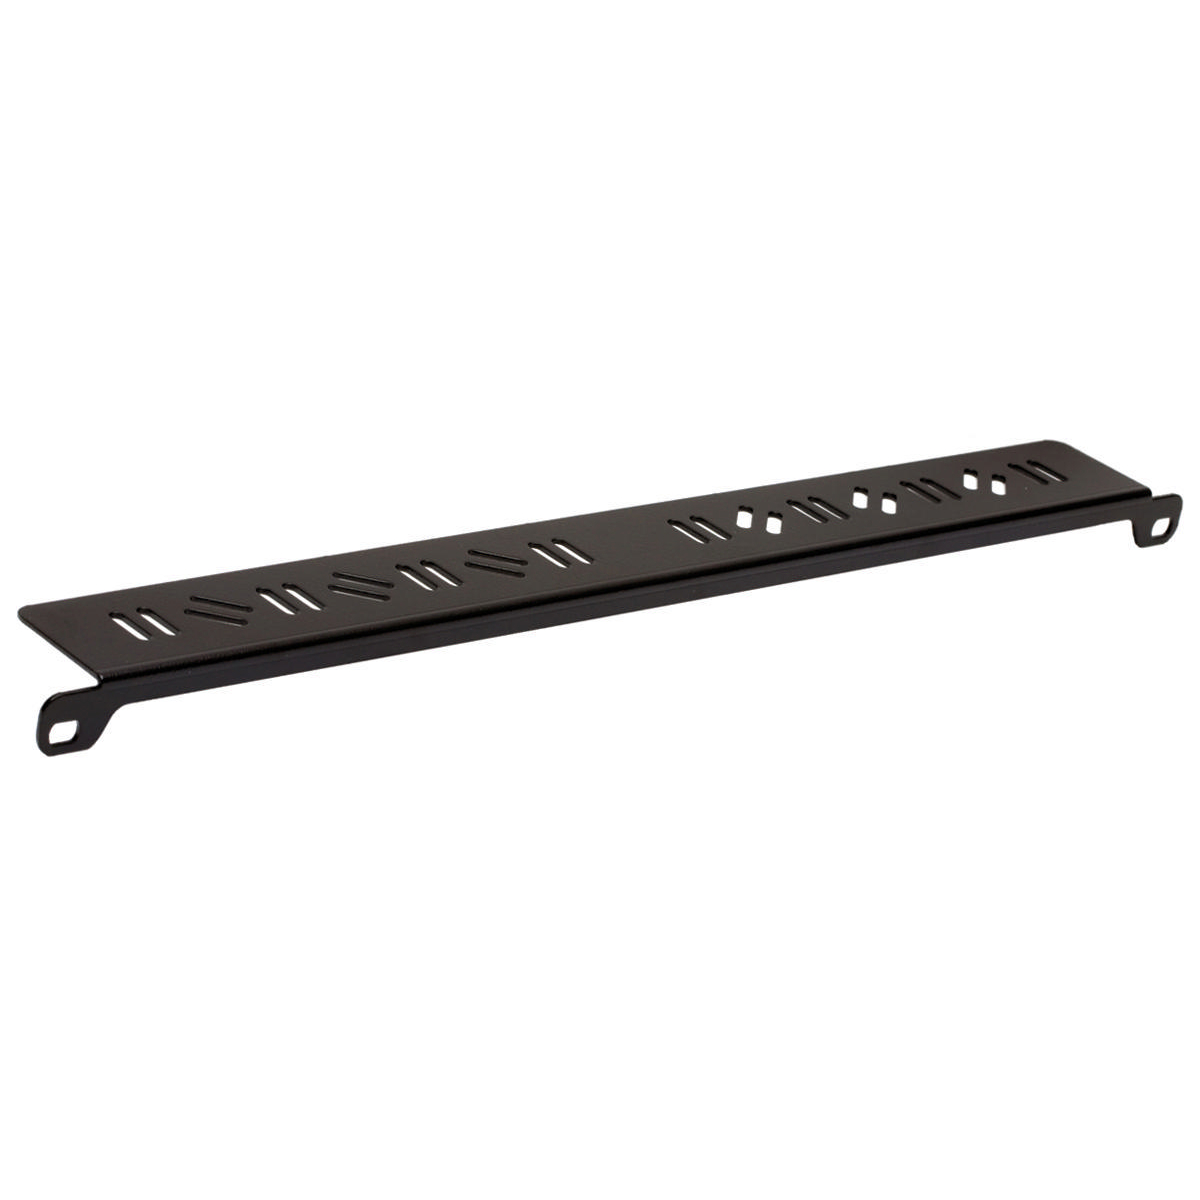 P-PANEL, REAR CABLE MGT BAR,19",RACK MT